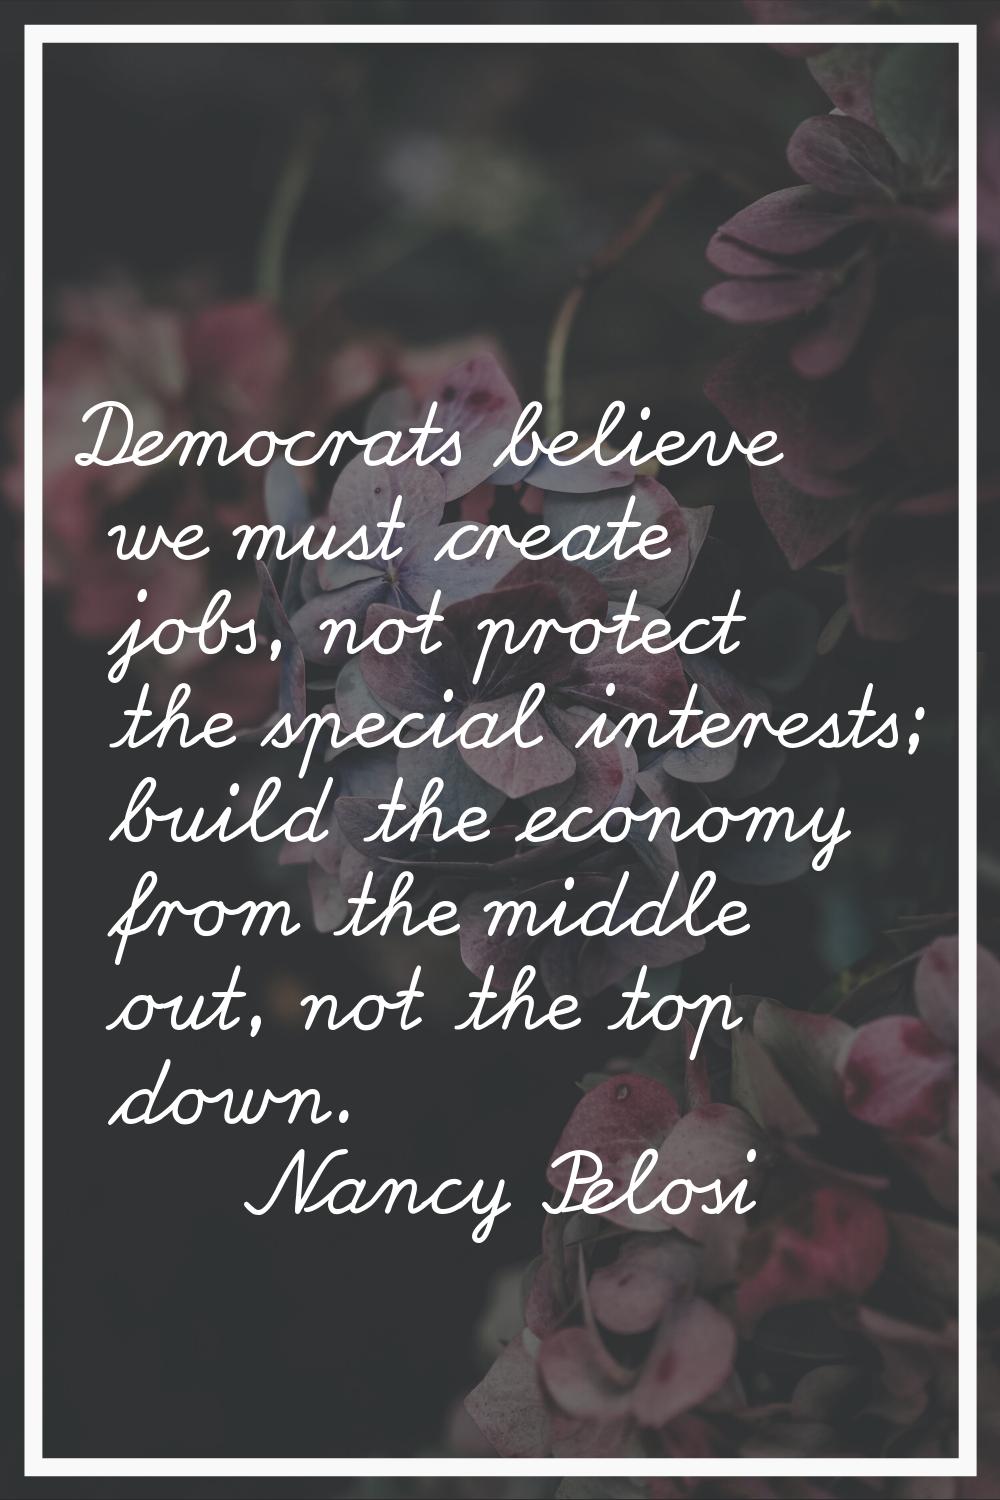 Democrats believe we must create jobs, not protect the special interests; build the economy from th